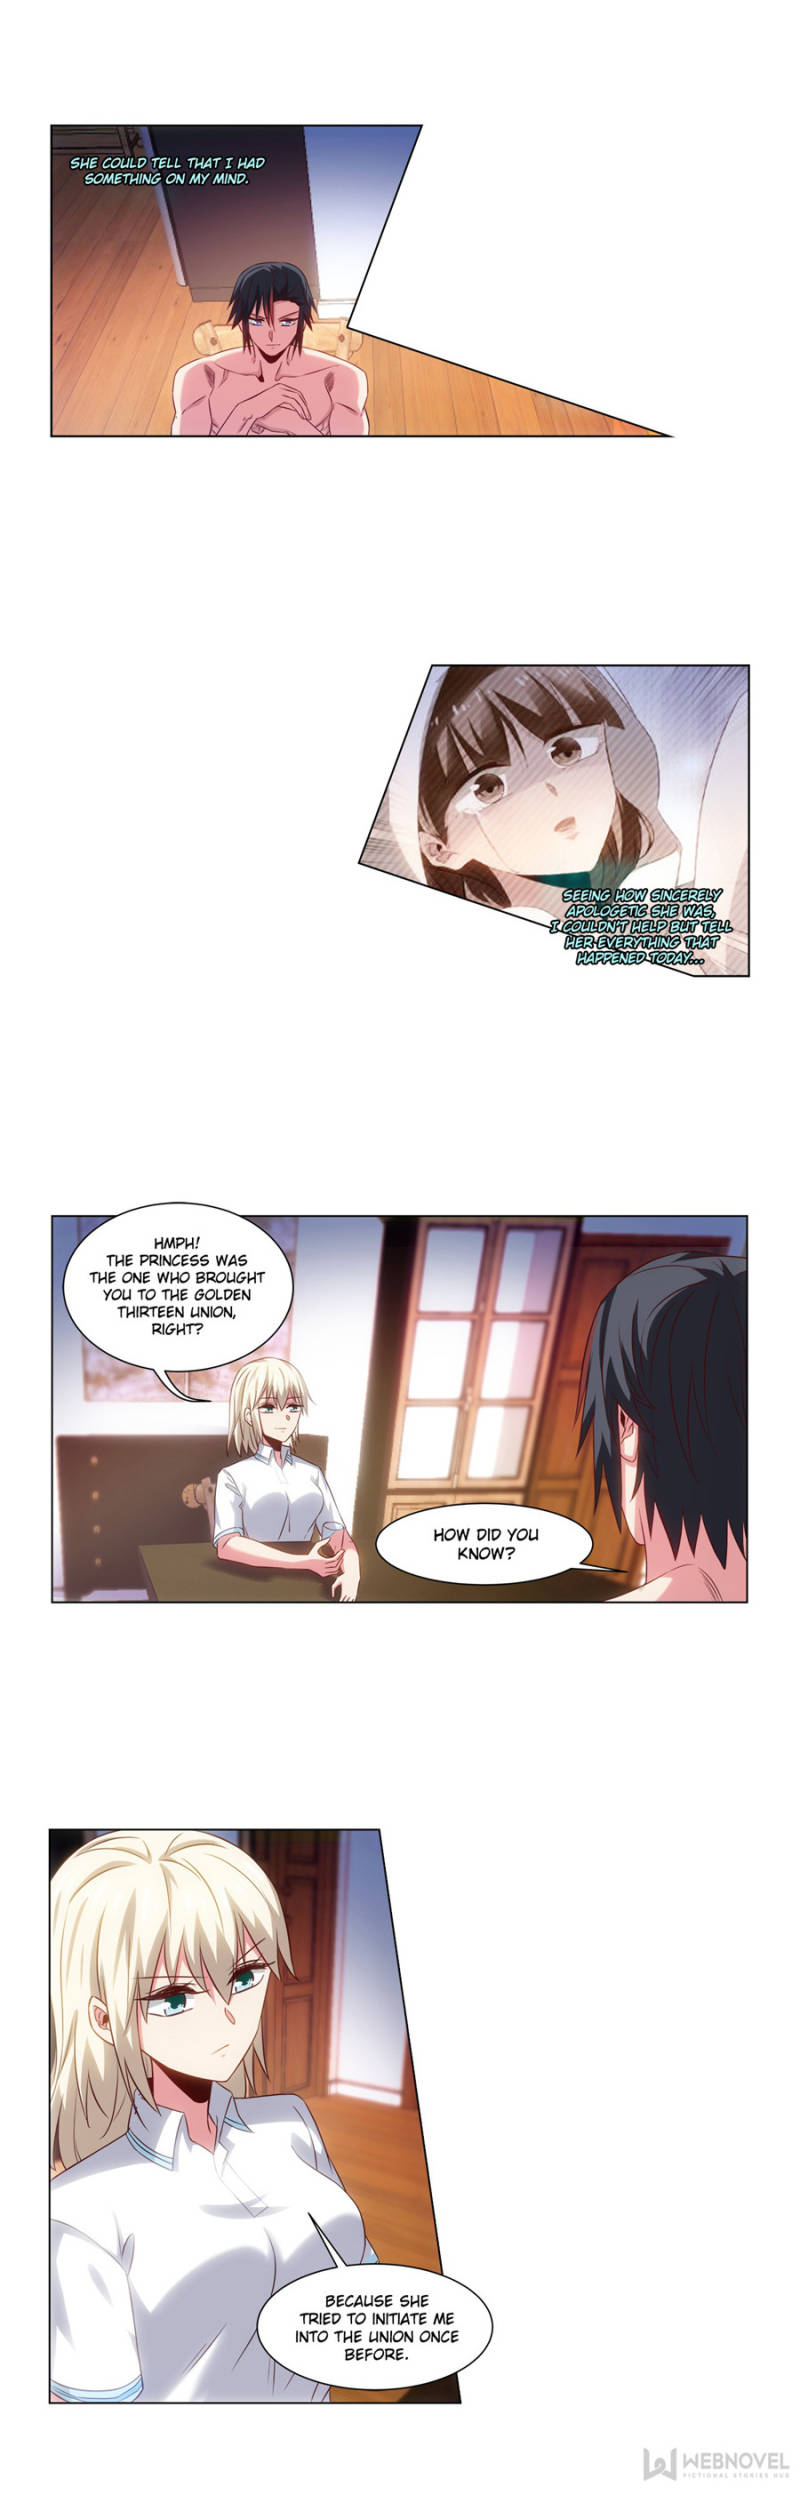 Vicious Luck - chapter 236 - #2